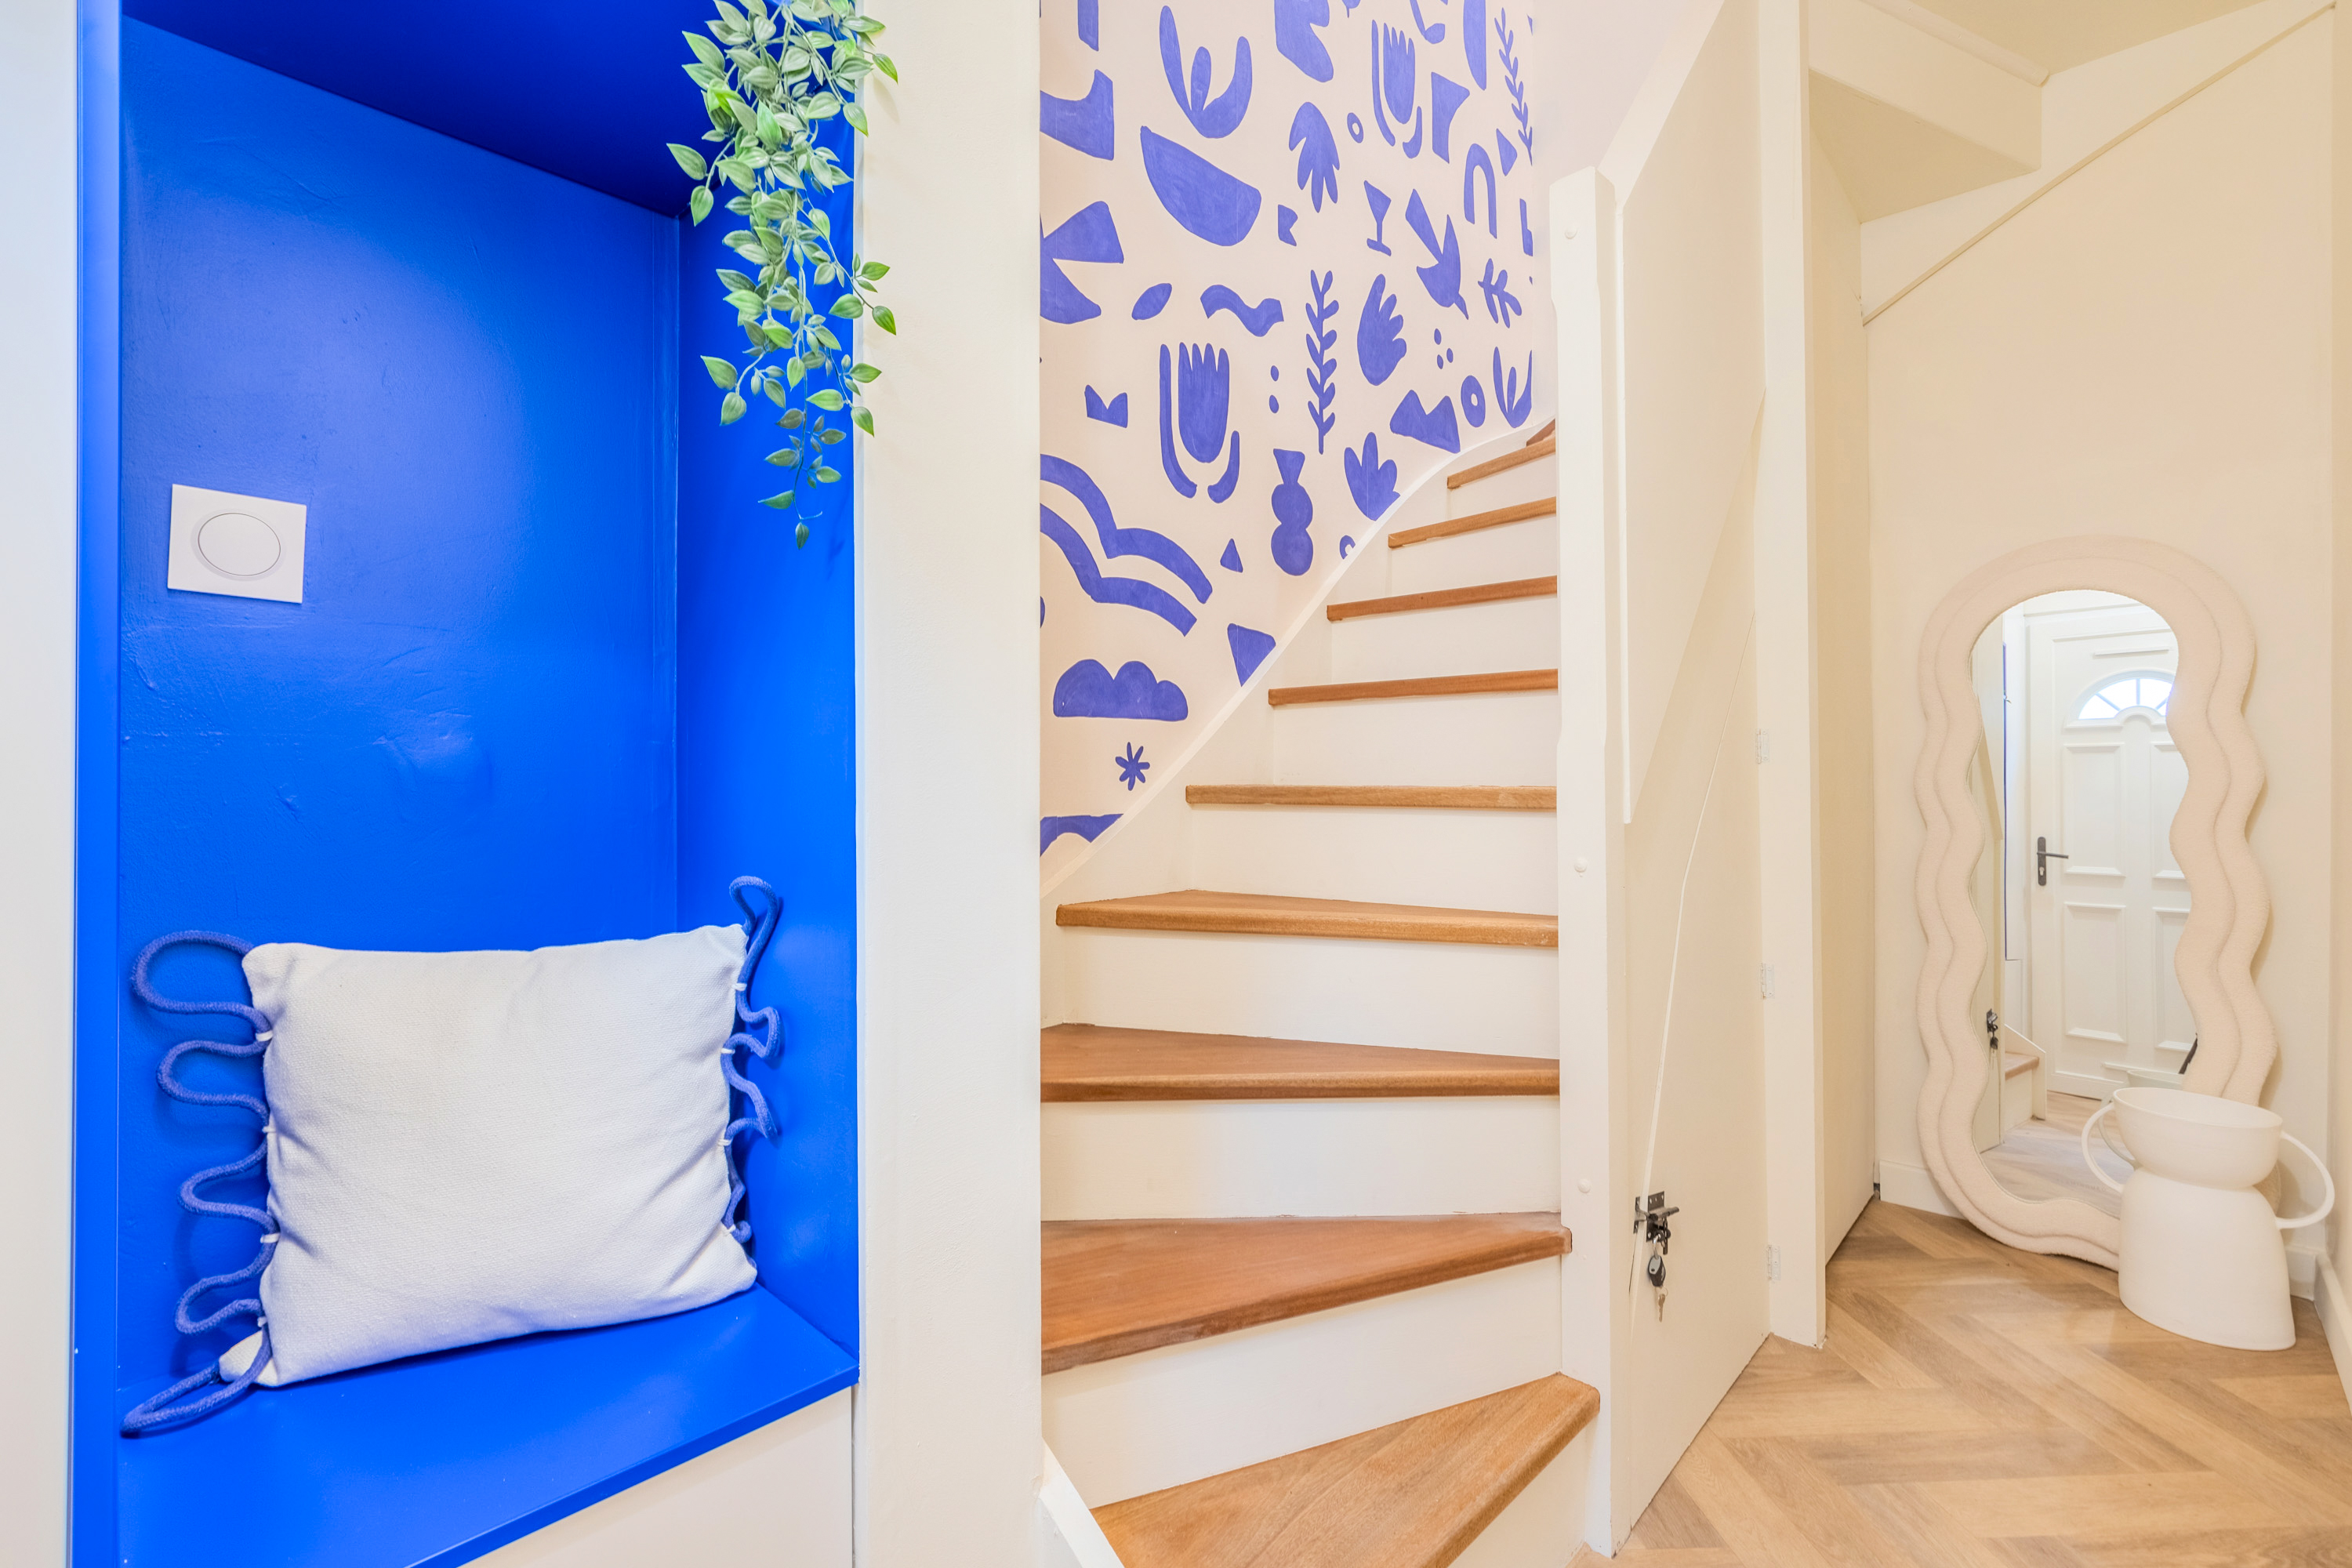 Interior shot of a duplex studio apartment in Lille: showing bright blue patterned wallpaper and an exposed timber staircase.